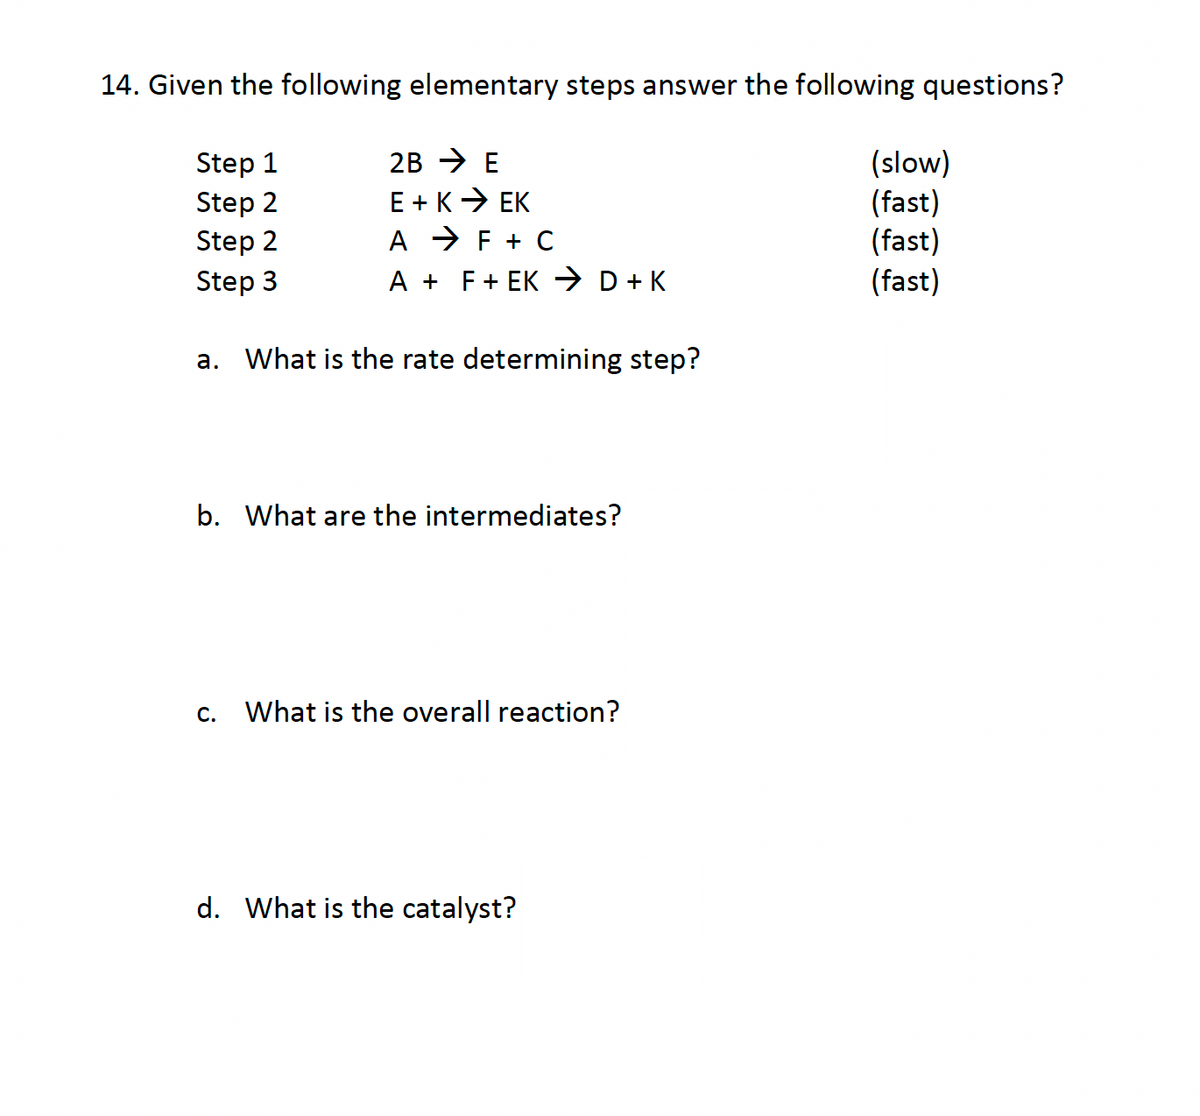 14. Given the following elementary steps answer the following questions?
Step 1
2B E
(slow)
Step 2
E+K → EK
(fast)
Step 2
A
F + C
(fast)
Step 3
A +
F + EK → D + K
(fast)
a. What is the rate determining step?
b. What are the intermediates?
C.
What is the overall reaction?
d. What is the catalyst?